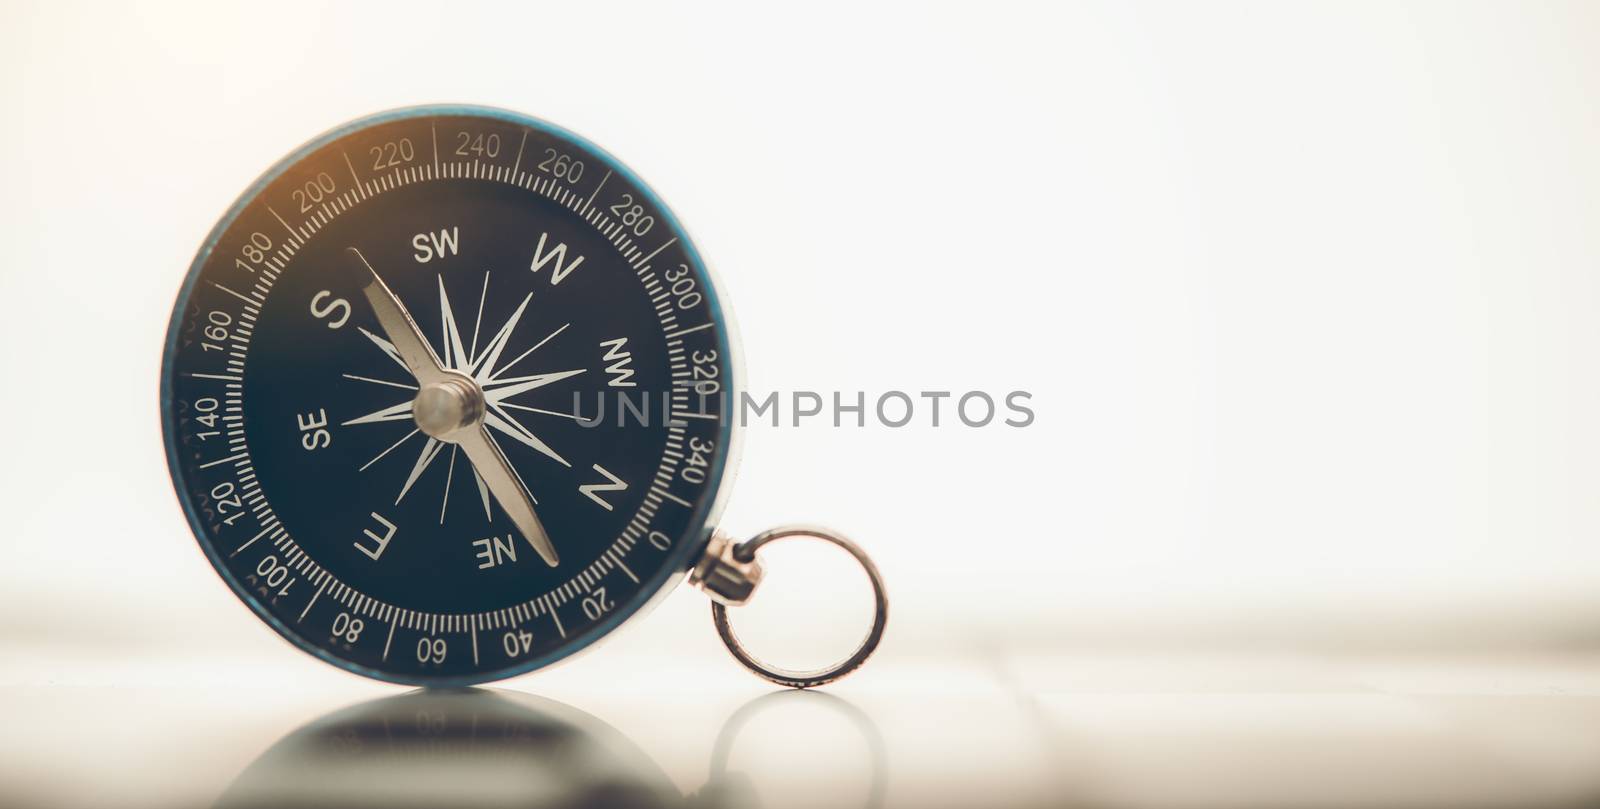 The blue compass is placed on background. by photobyphotoboy